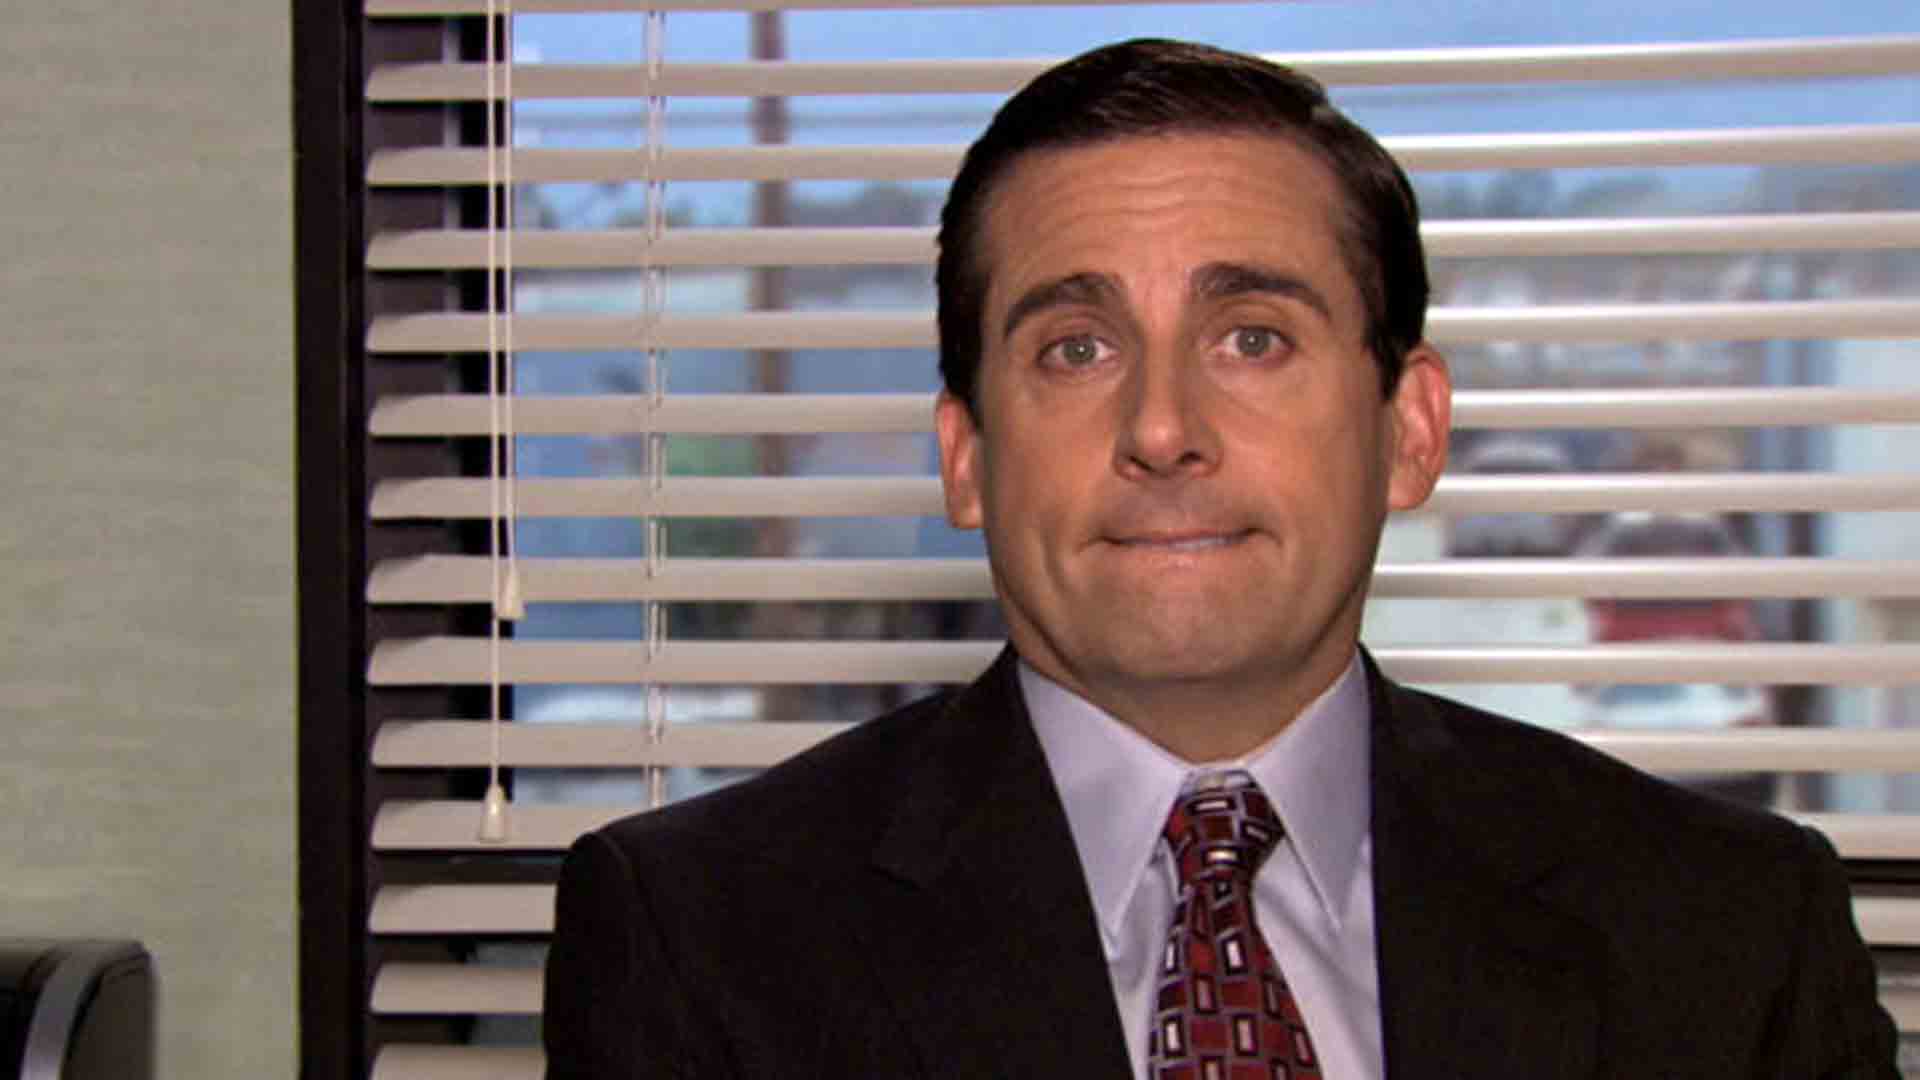 Steve Carell Bids Farewell To 'The Office' After 7 Seasons. Access